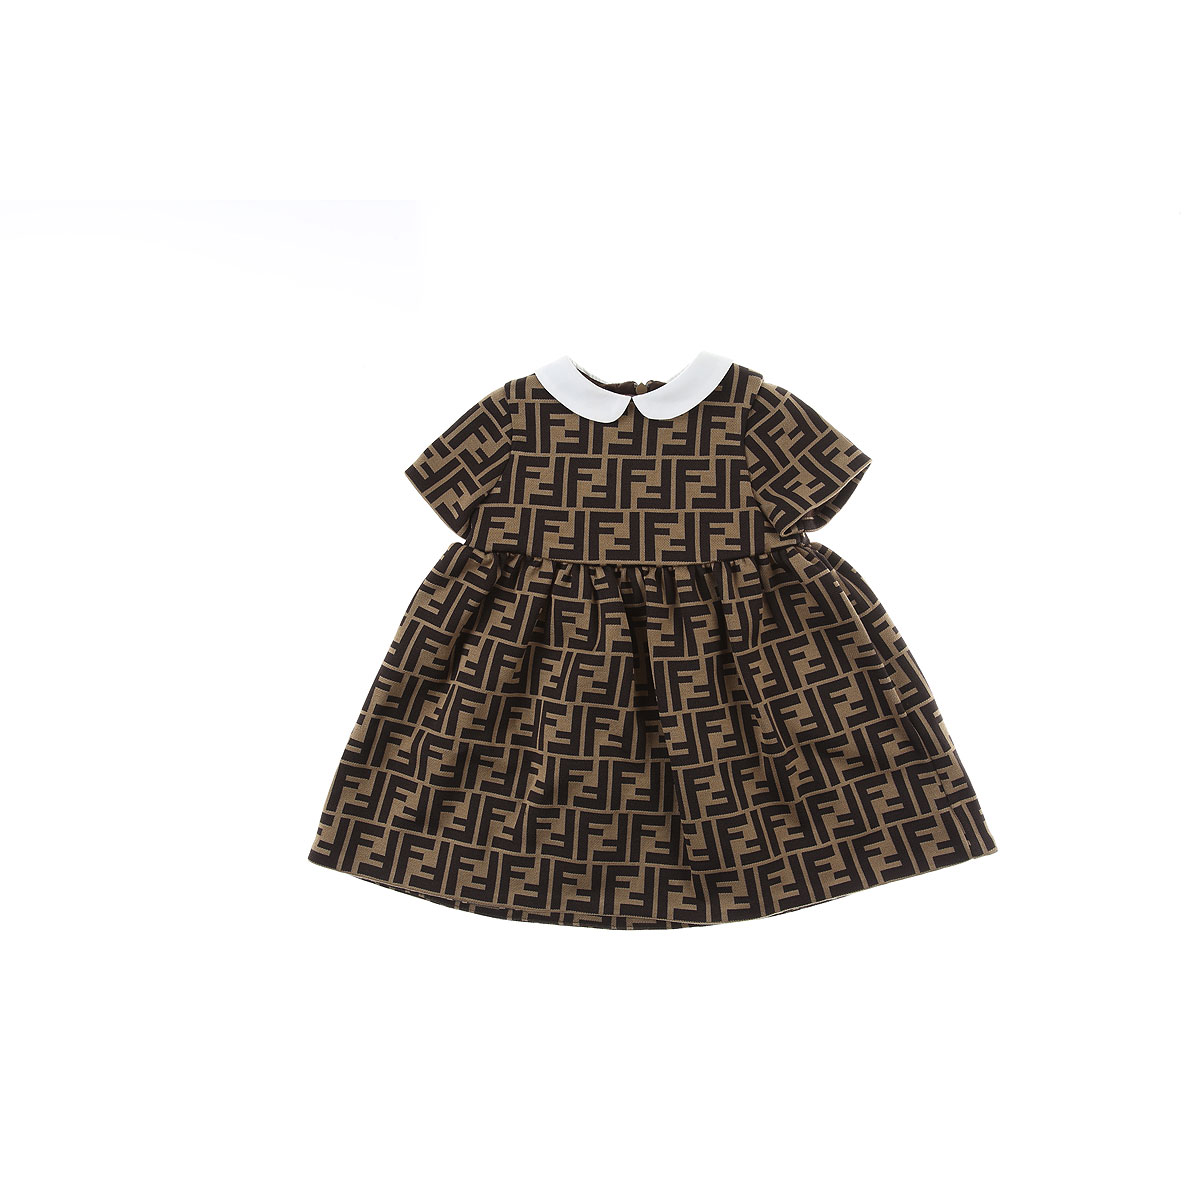 Baby Girl Clothing Fendi, Style code: bfb188-a6a6-f0e0x